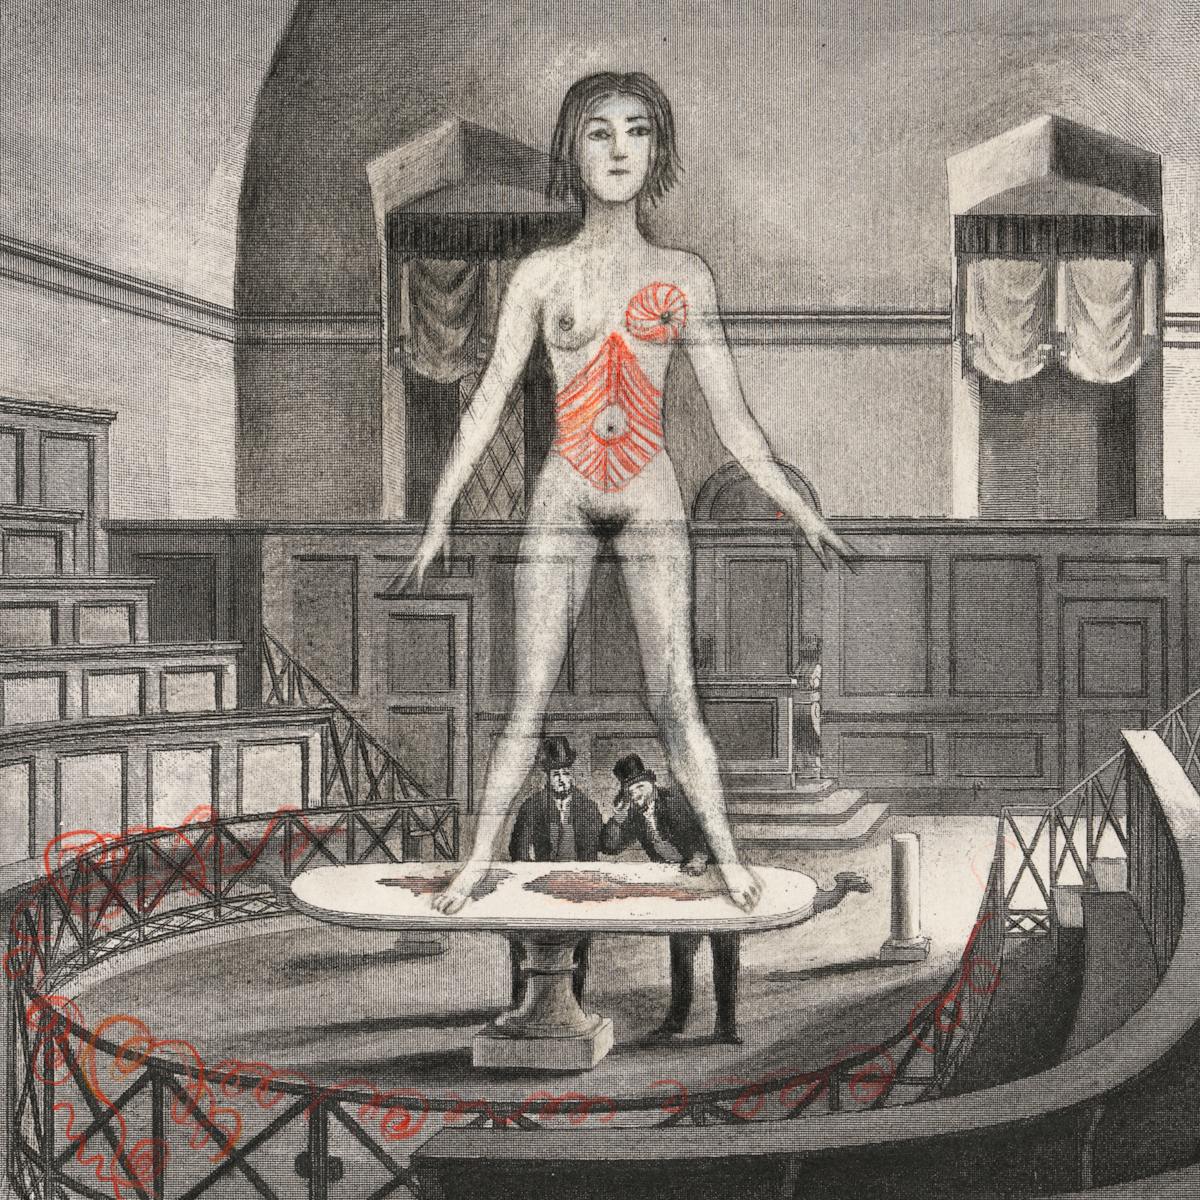 Pencil artwork drawn over an engraving depicting an old anatomy theatre with two men in the centre, by a table looking up towards a large (in scale) unclothed woman standing on the table, arms held away from her body. The whole scene is black and white apart from her torso and left breast, and thin cords woven into some railings which are tinted red.